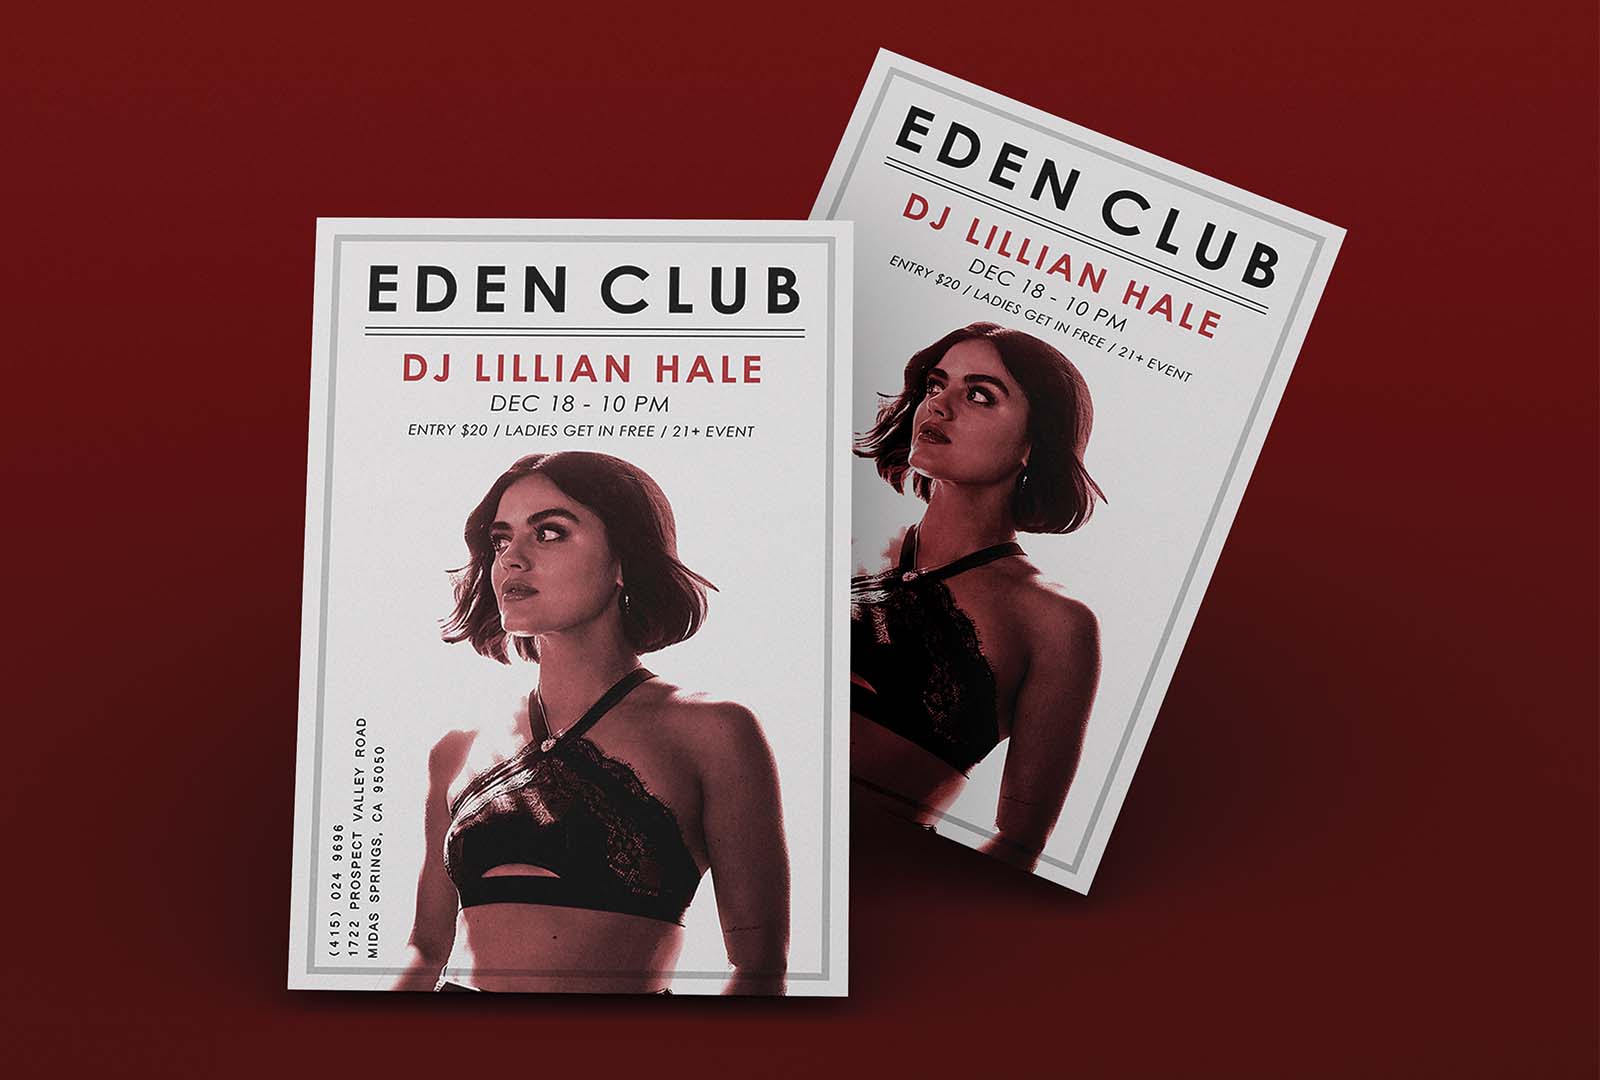  / “Eden Club”; Nightclub Postcard, 5x7 inches print ad, 2021. Postcard sent out by a higher-end nightclub geared to a crowd with more refined taste. 